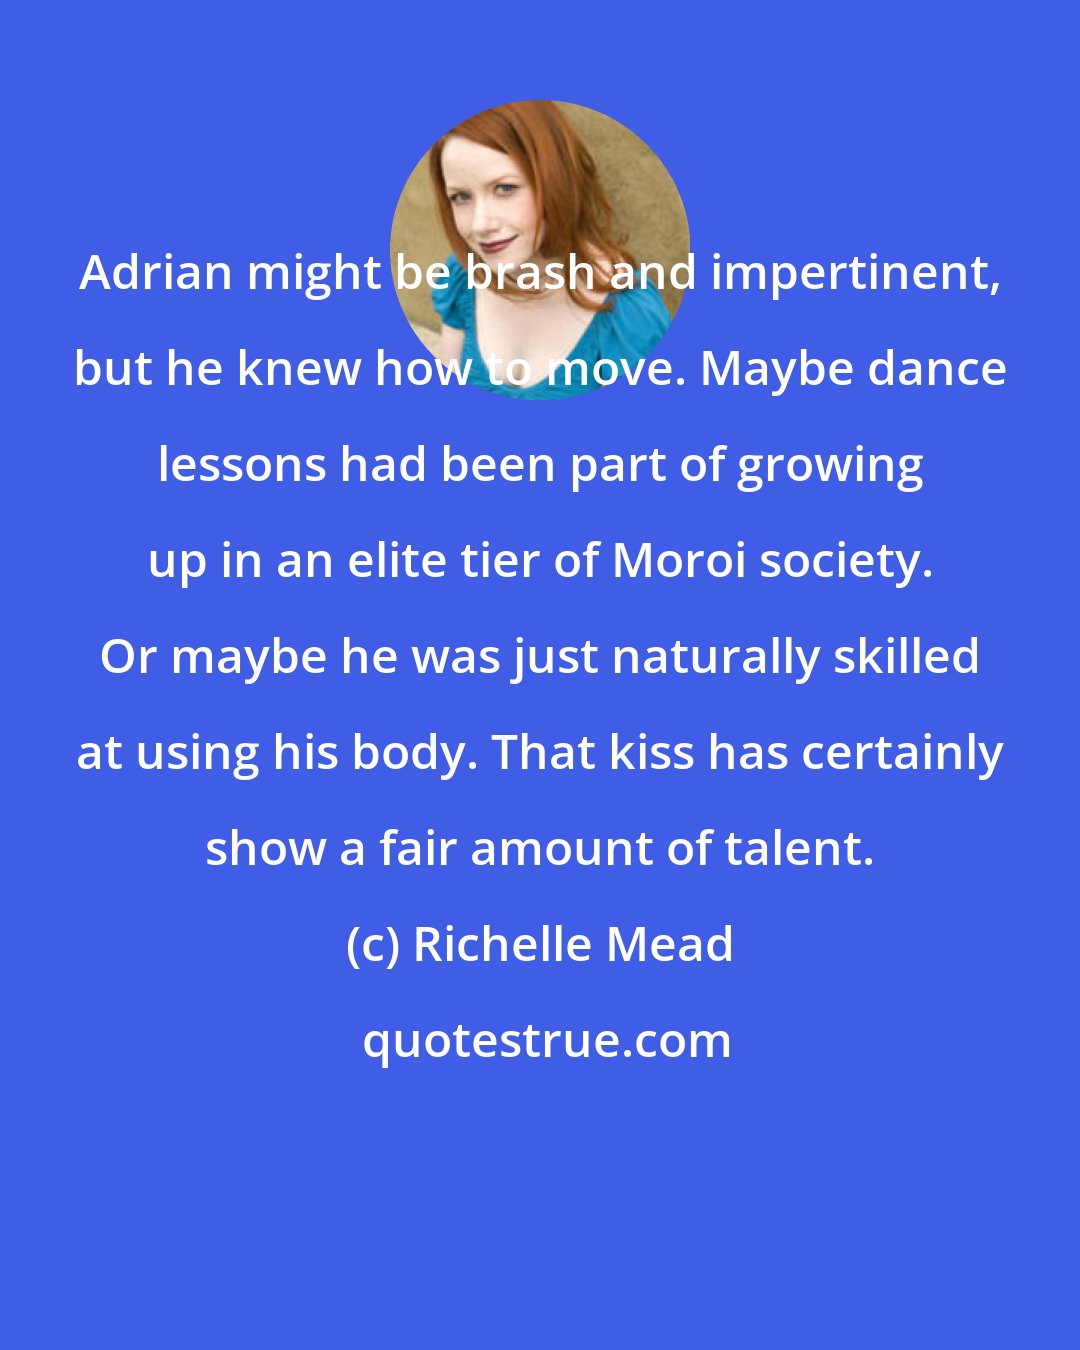 Richelle Mead: Adrian might be brash and impertinent, but he knew how to move. Maybe dance lessons had been part of growing up in an elite tier of Moroi society. Or maybe he was just naturally skilled at using his body. That kiss has certainly show a fair amount of talent.